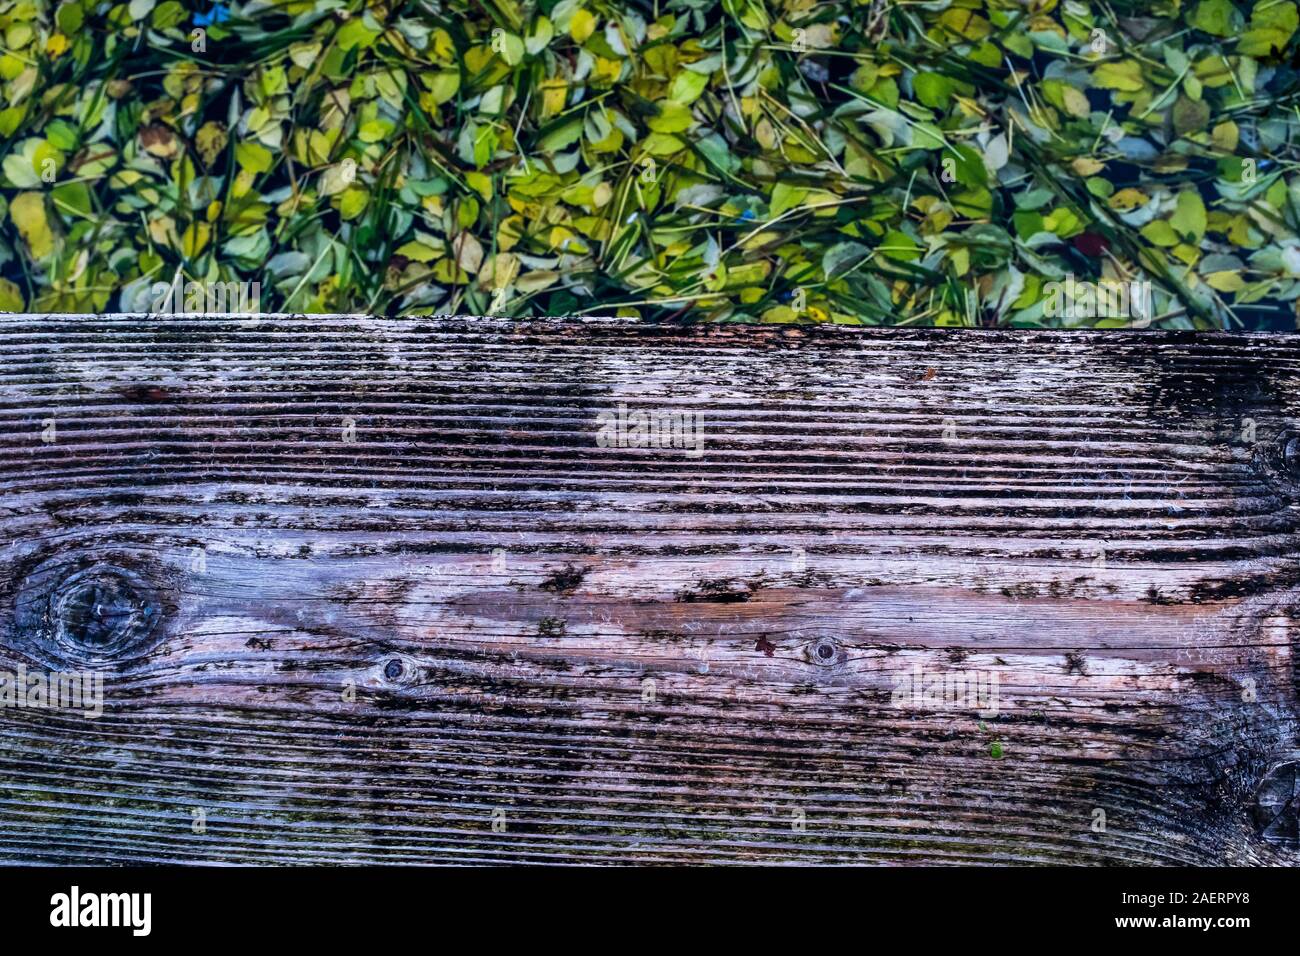 From a wooden footpath, a close-up look at a thick carpet of leaves pads floating on the lake water. Focus on foreground at the wooden plank. Stock Photo